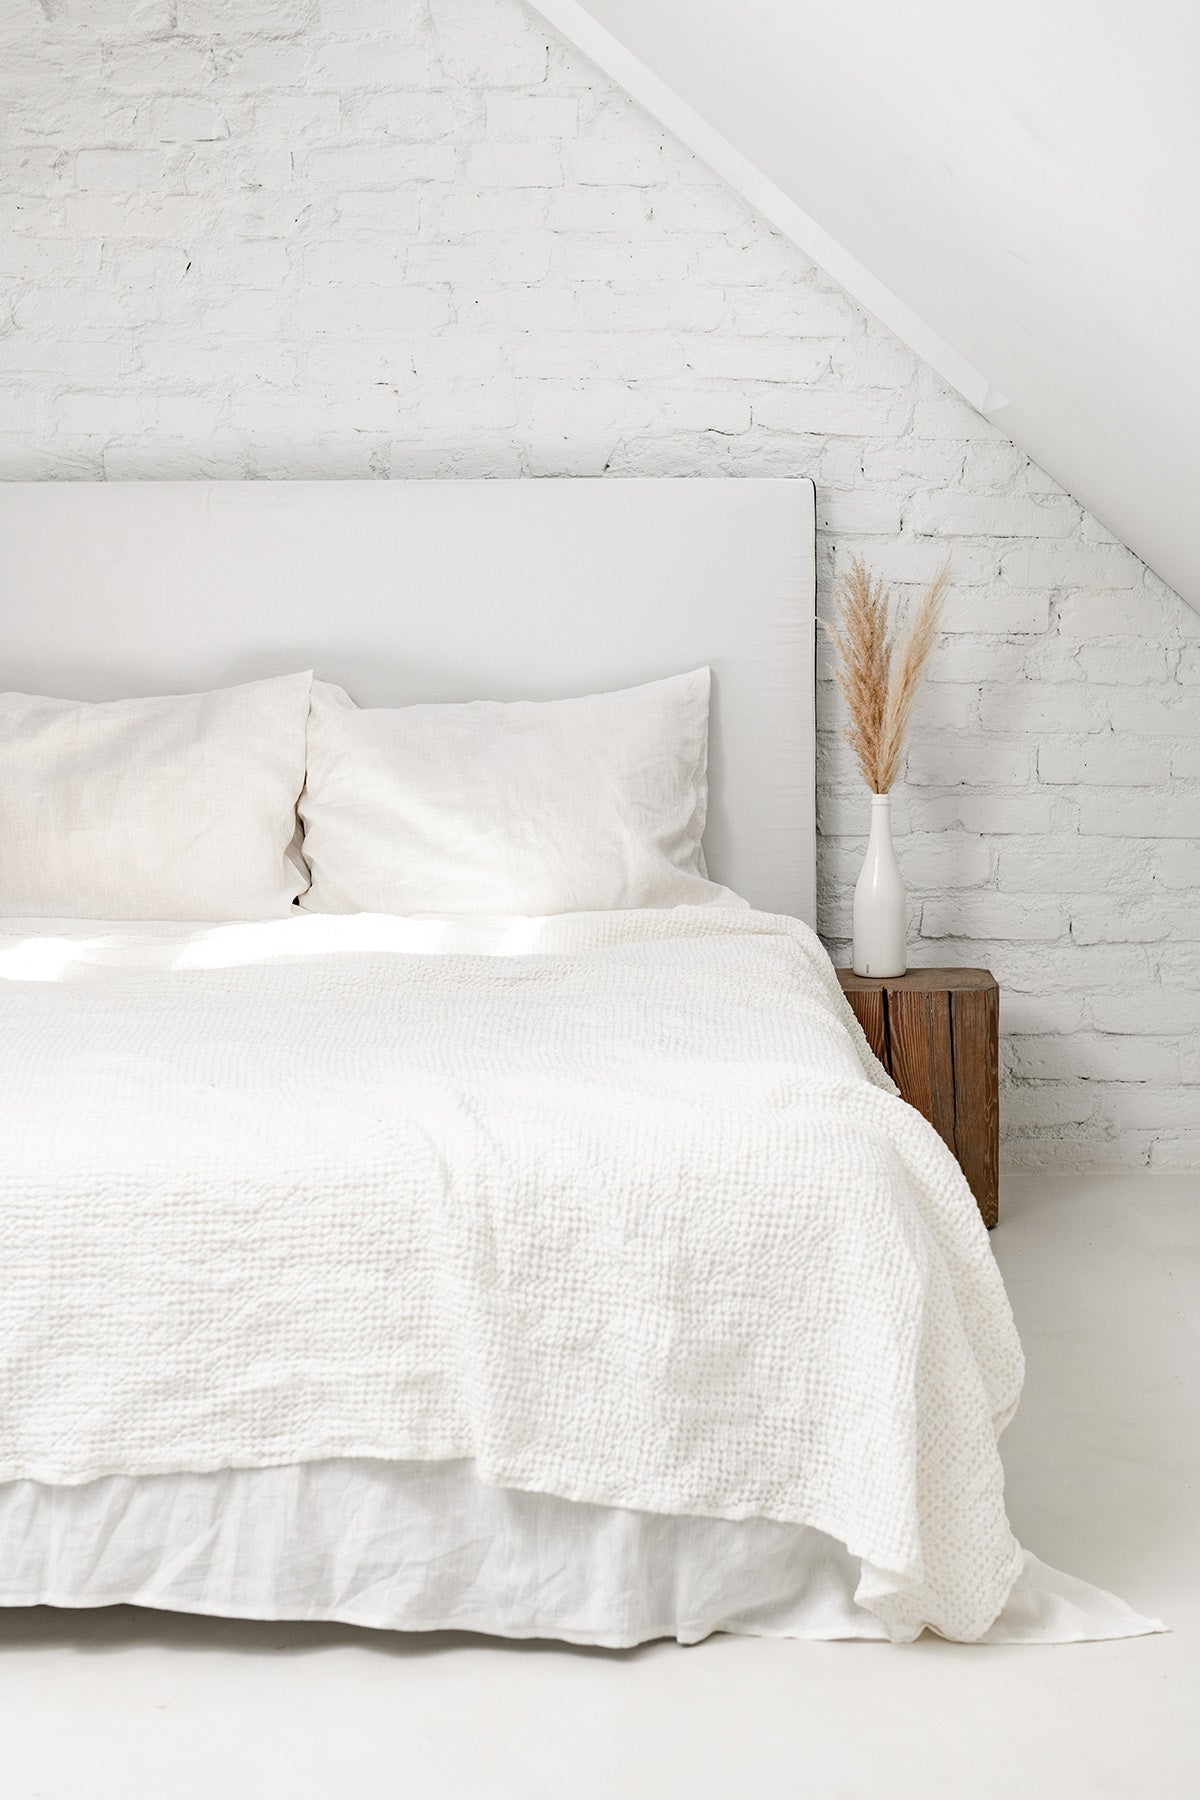 Linen Waffle Blanket on Bed by Amourlinen